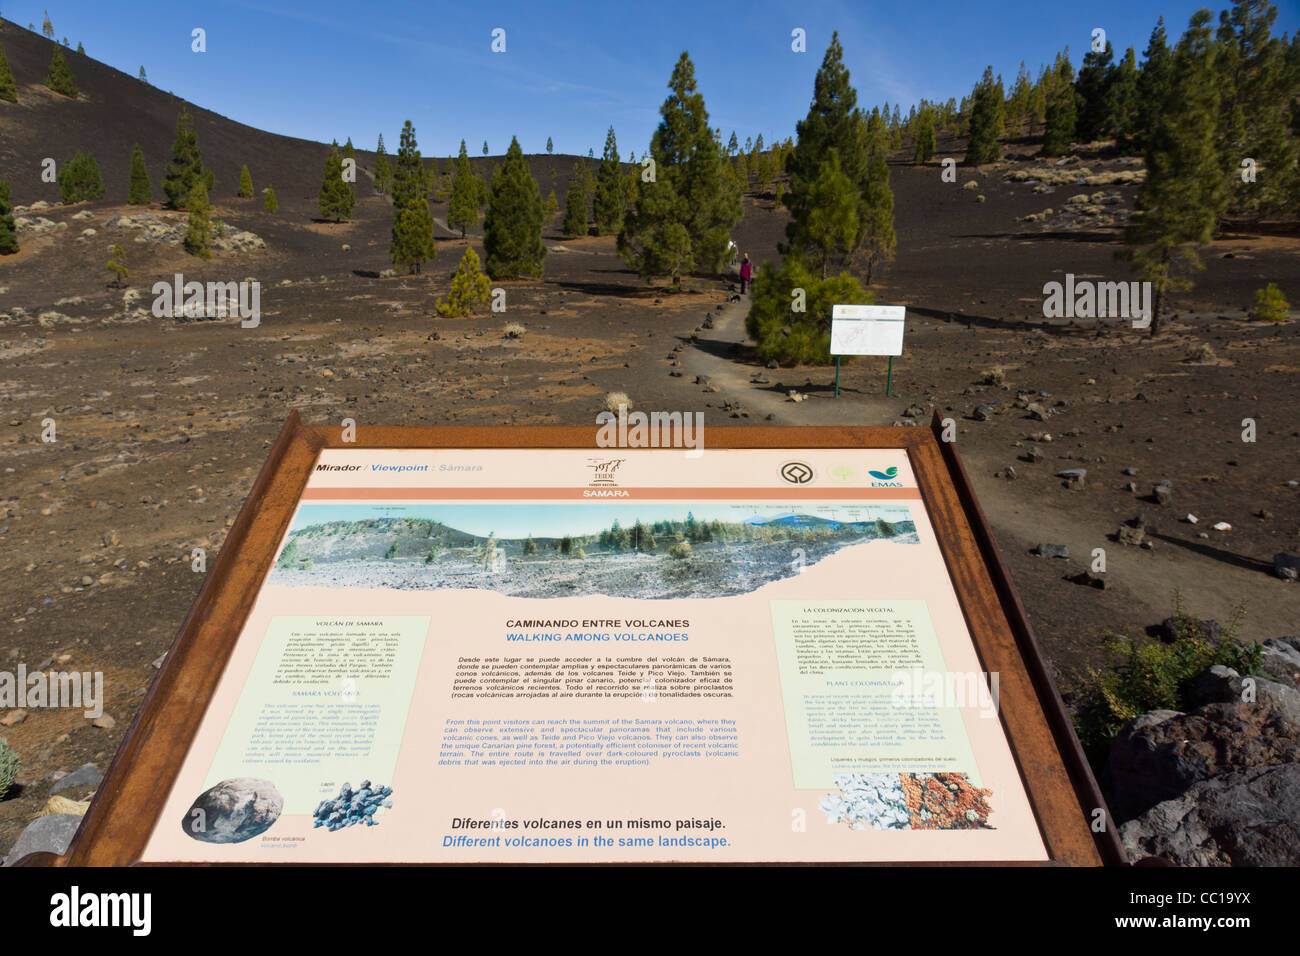 The Samara volcano footpaths, approach to Mount Teide, Tenerife. Information and map board at car park area. Stock Photo